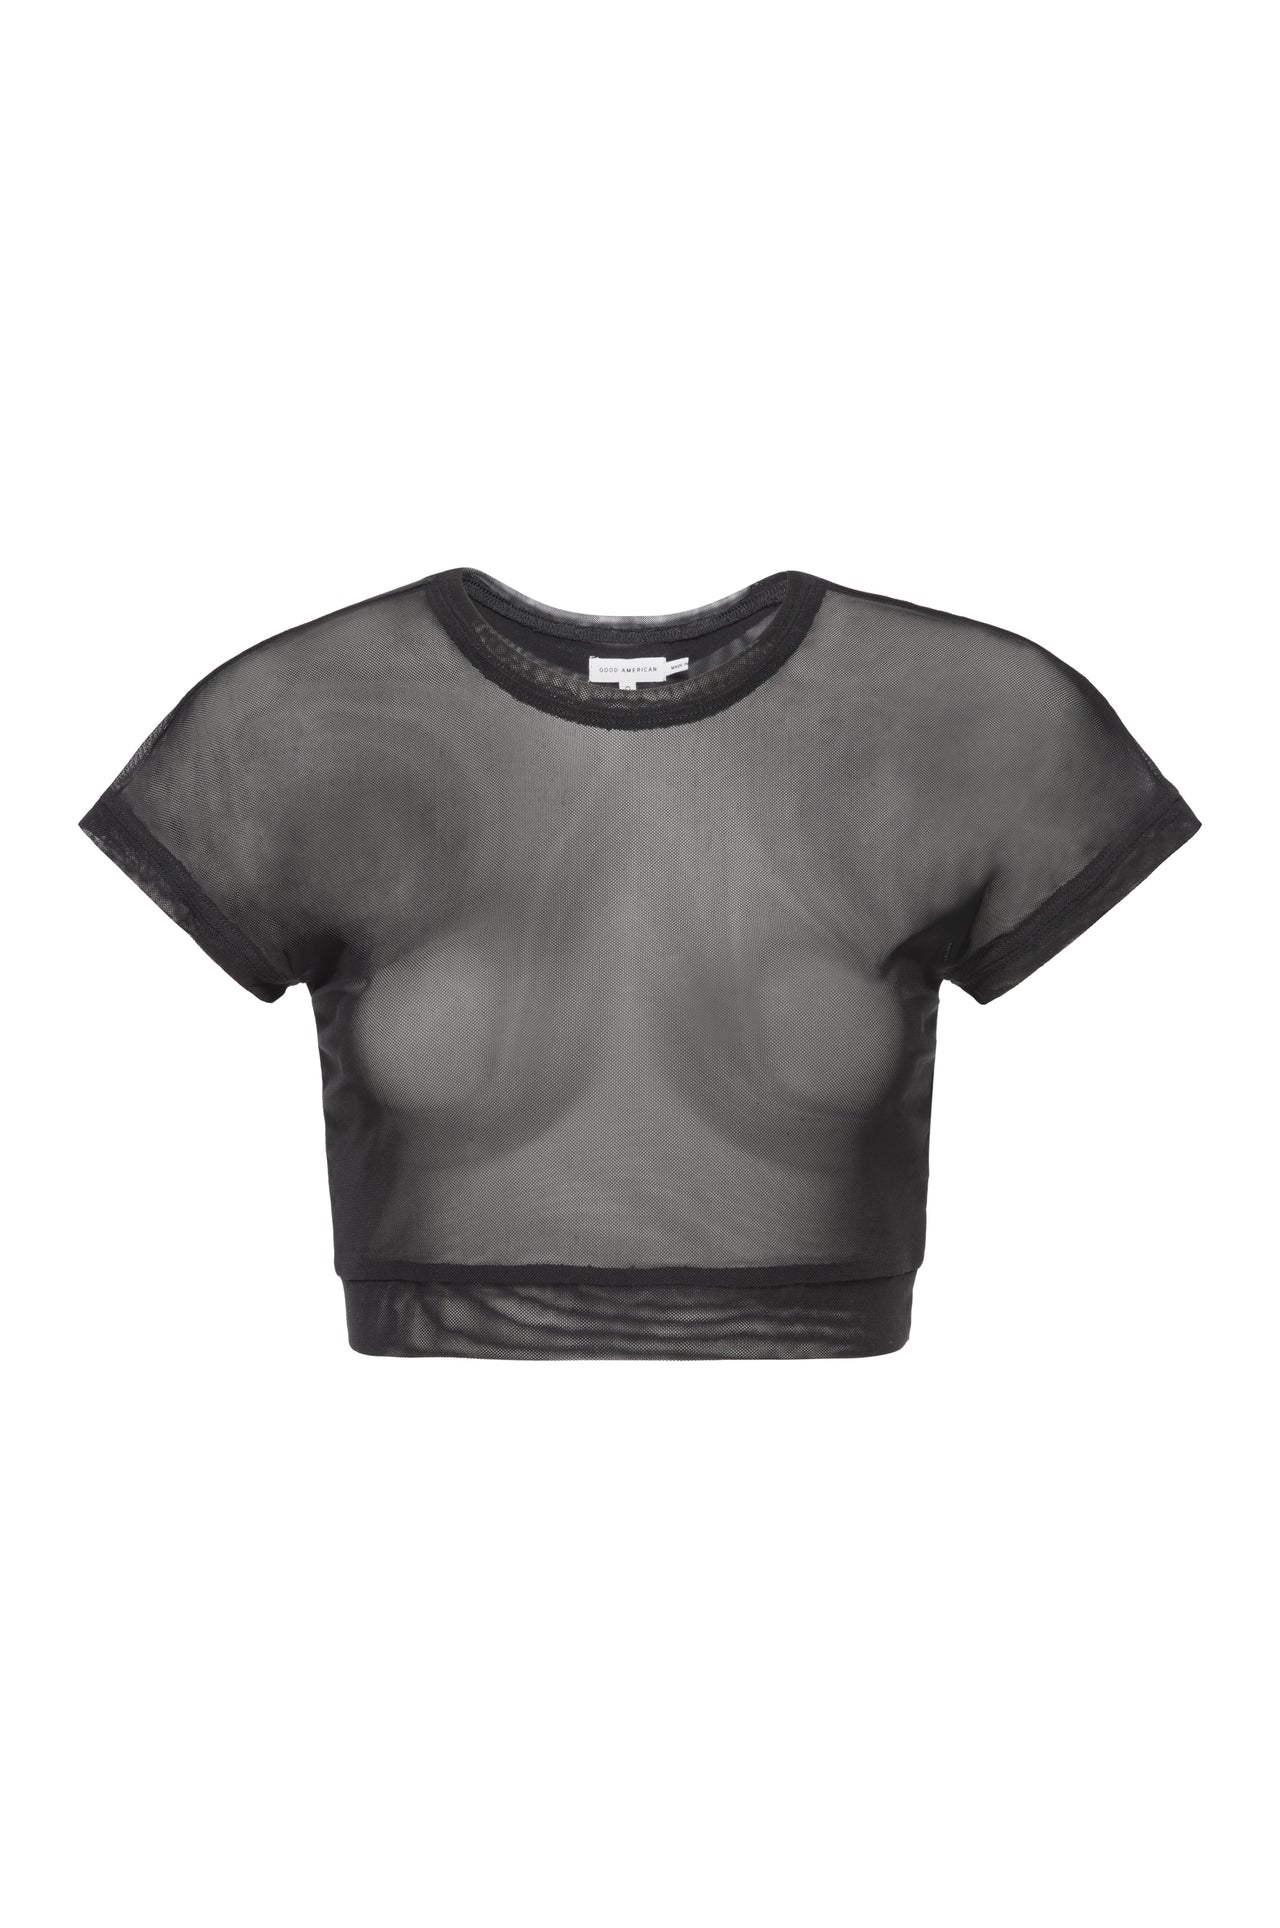 Cropped Mesh Tee Black, Short Tee by Good American | LIT Boutique